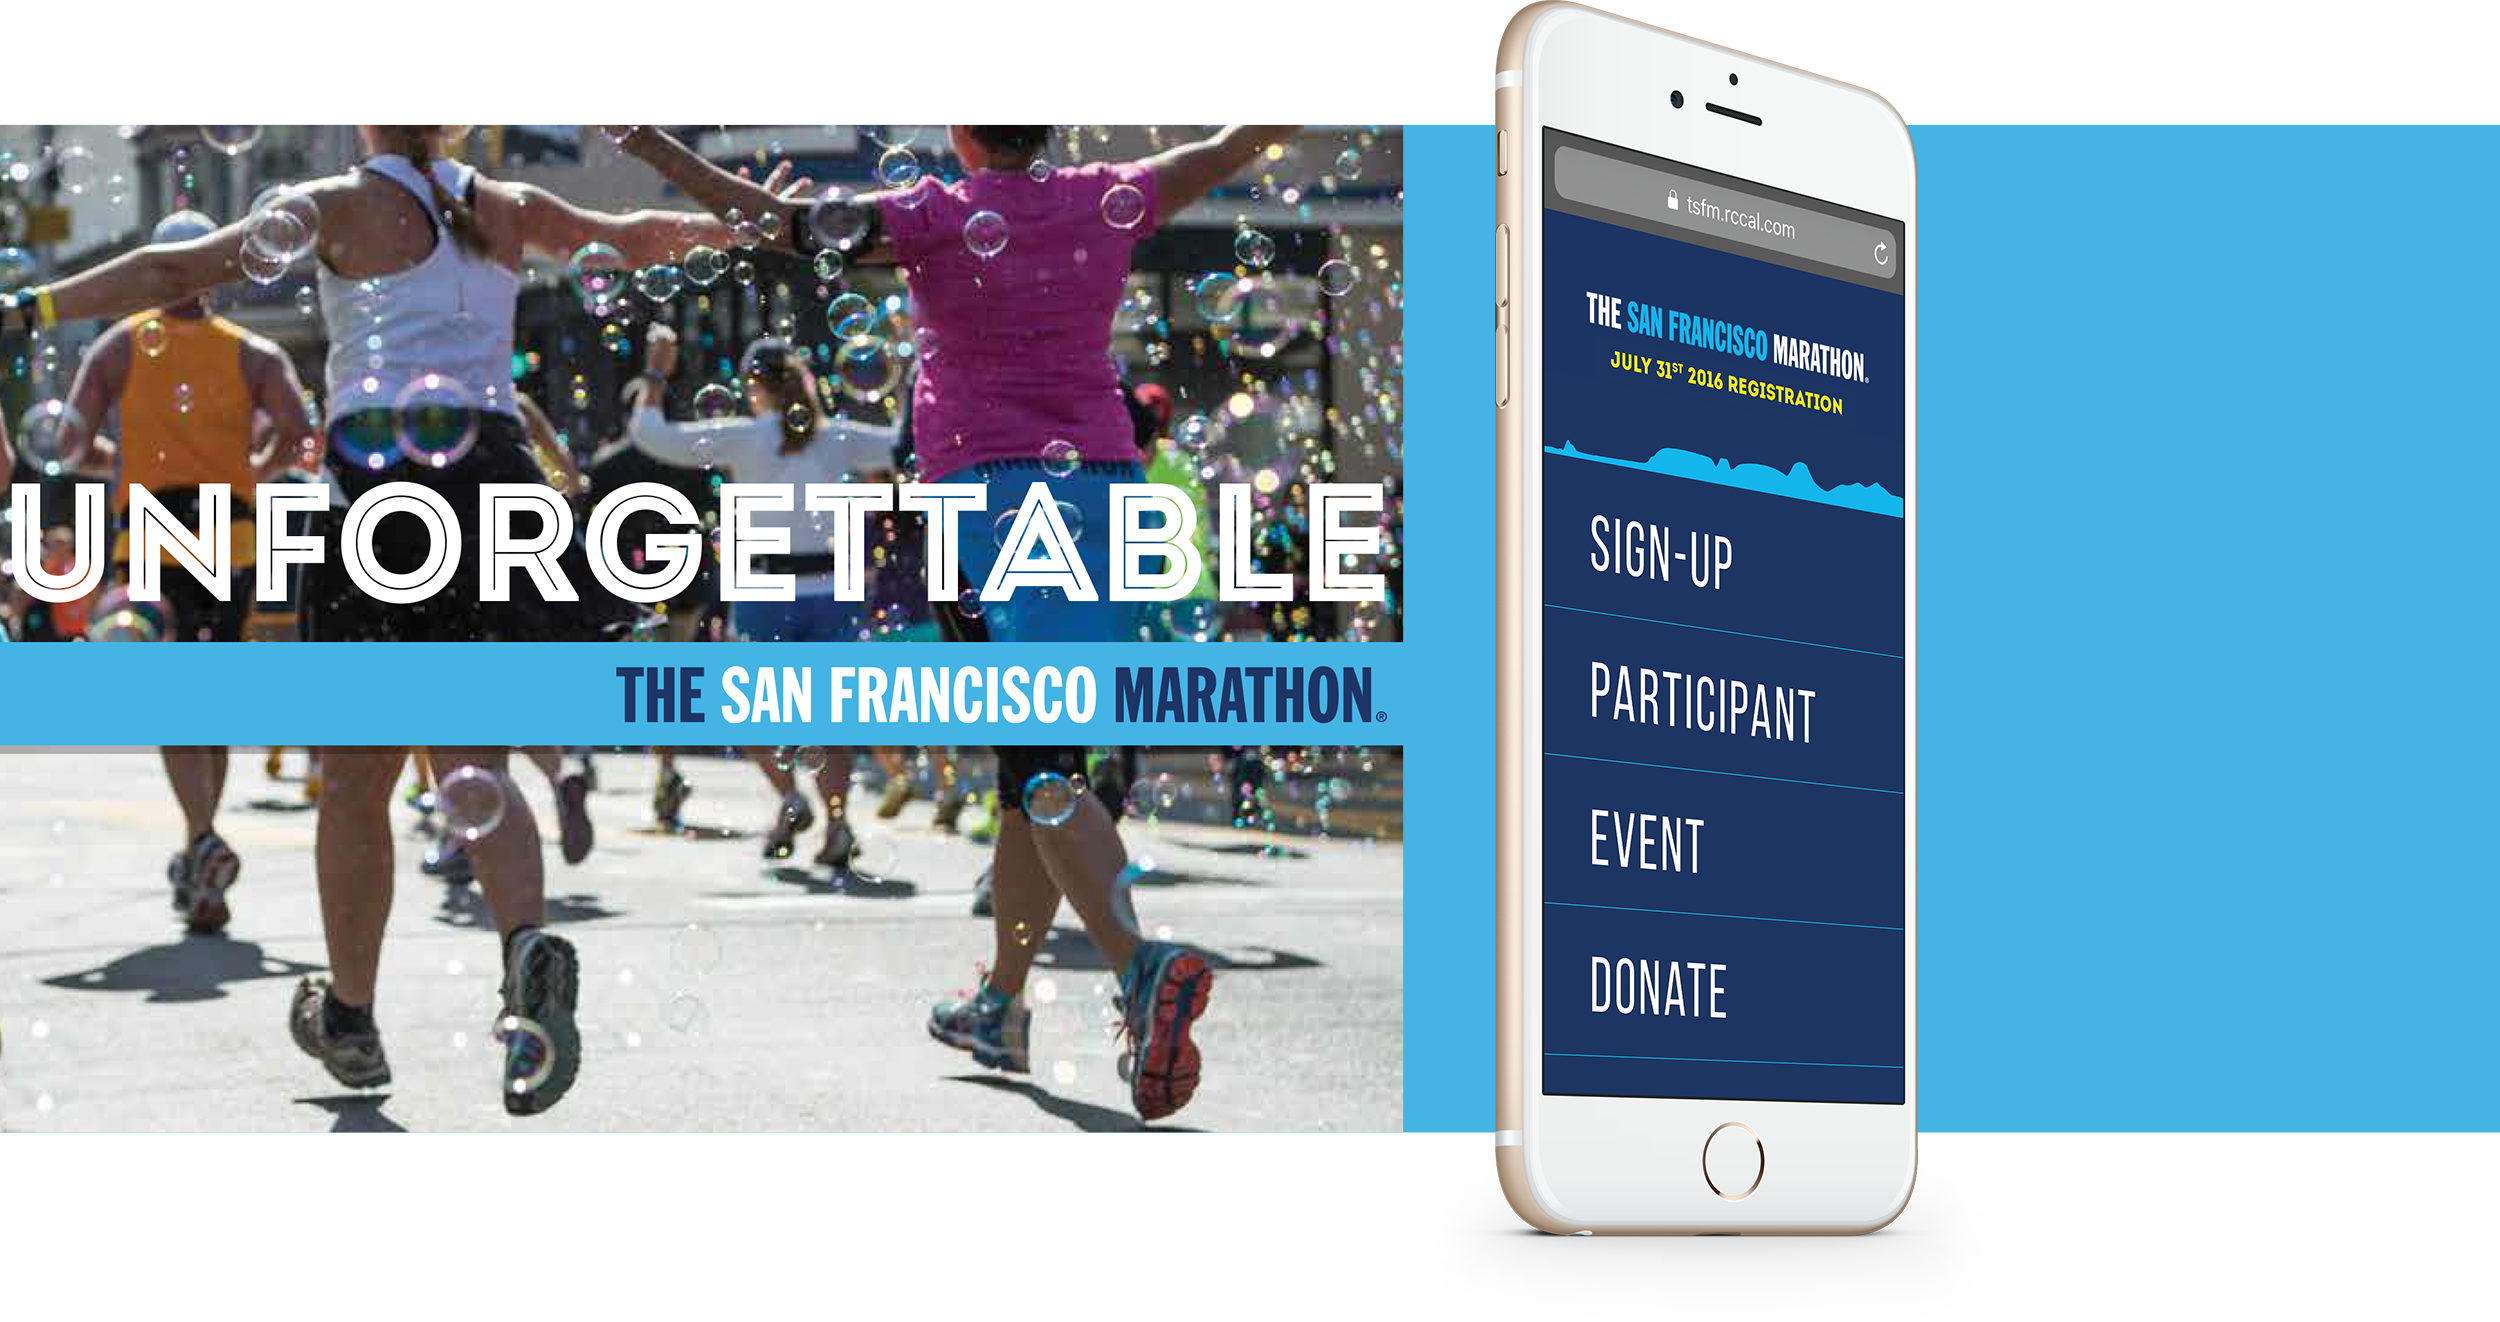 Mobile device showing page from San Francisco Marathon app.